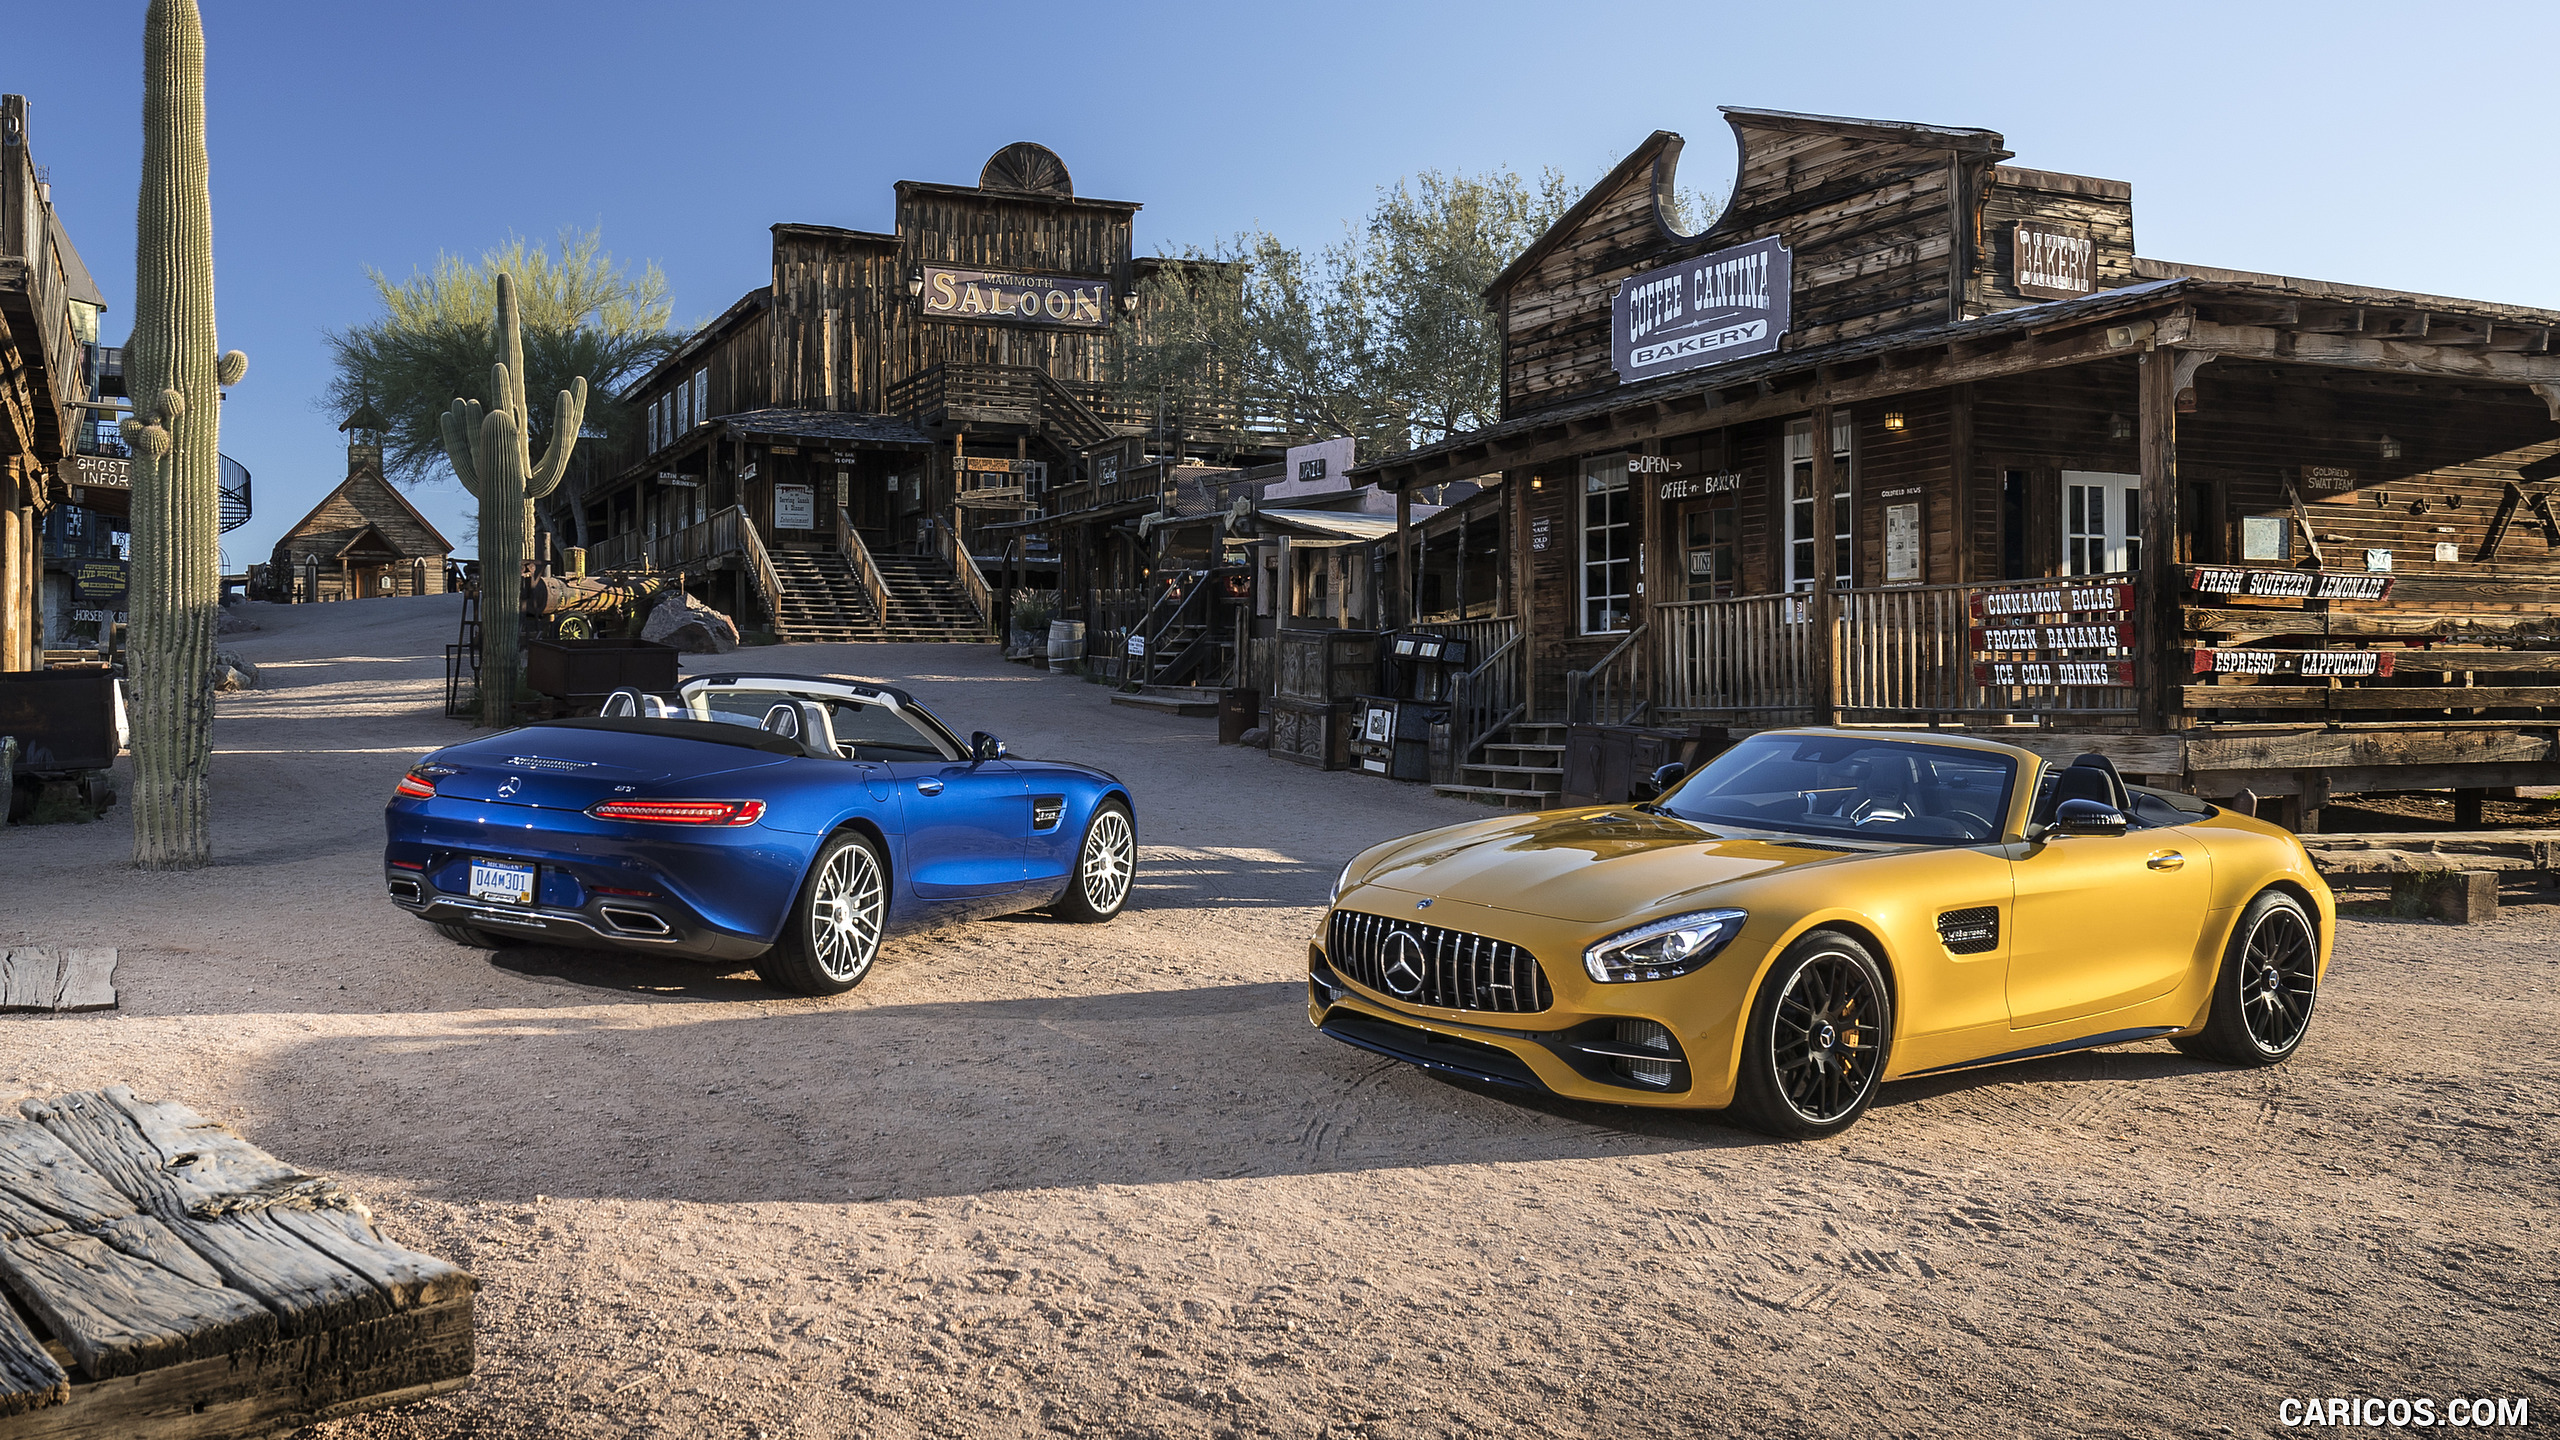 2018 Mercedes-AMG GT C Roadster - Front Three-Quarter, #169 of 350